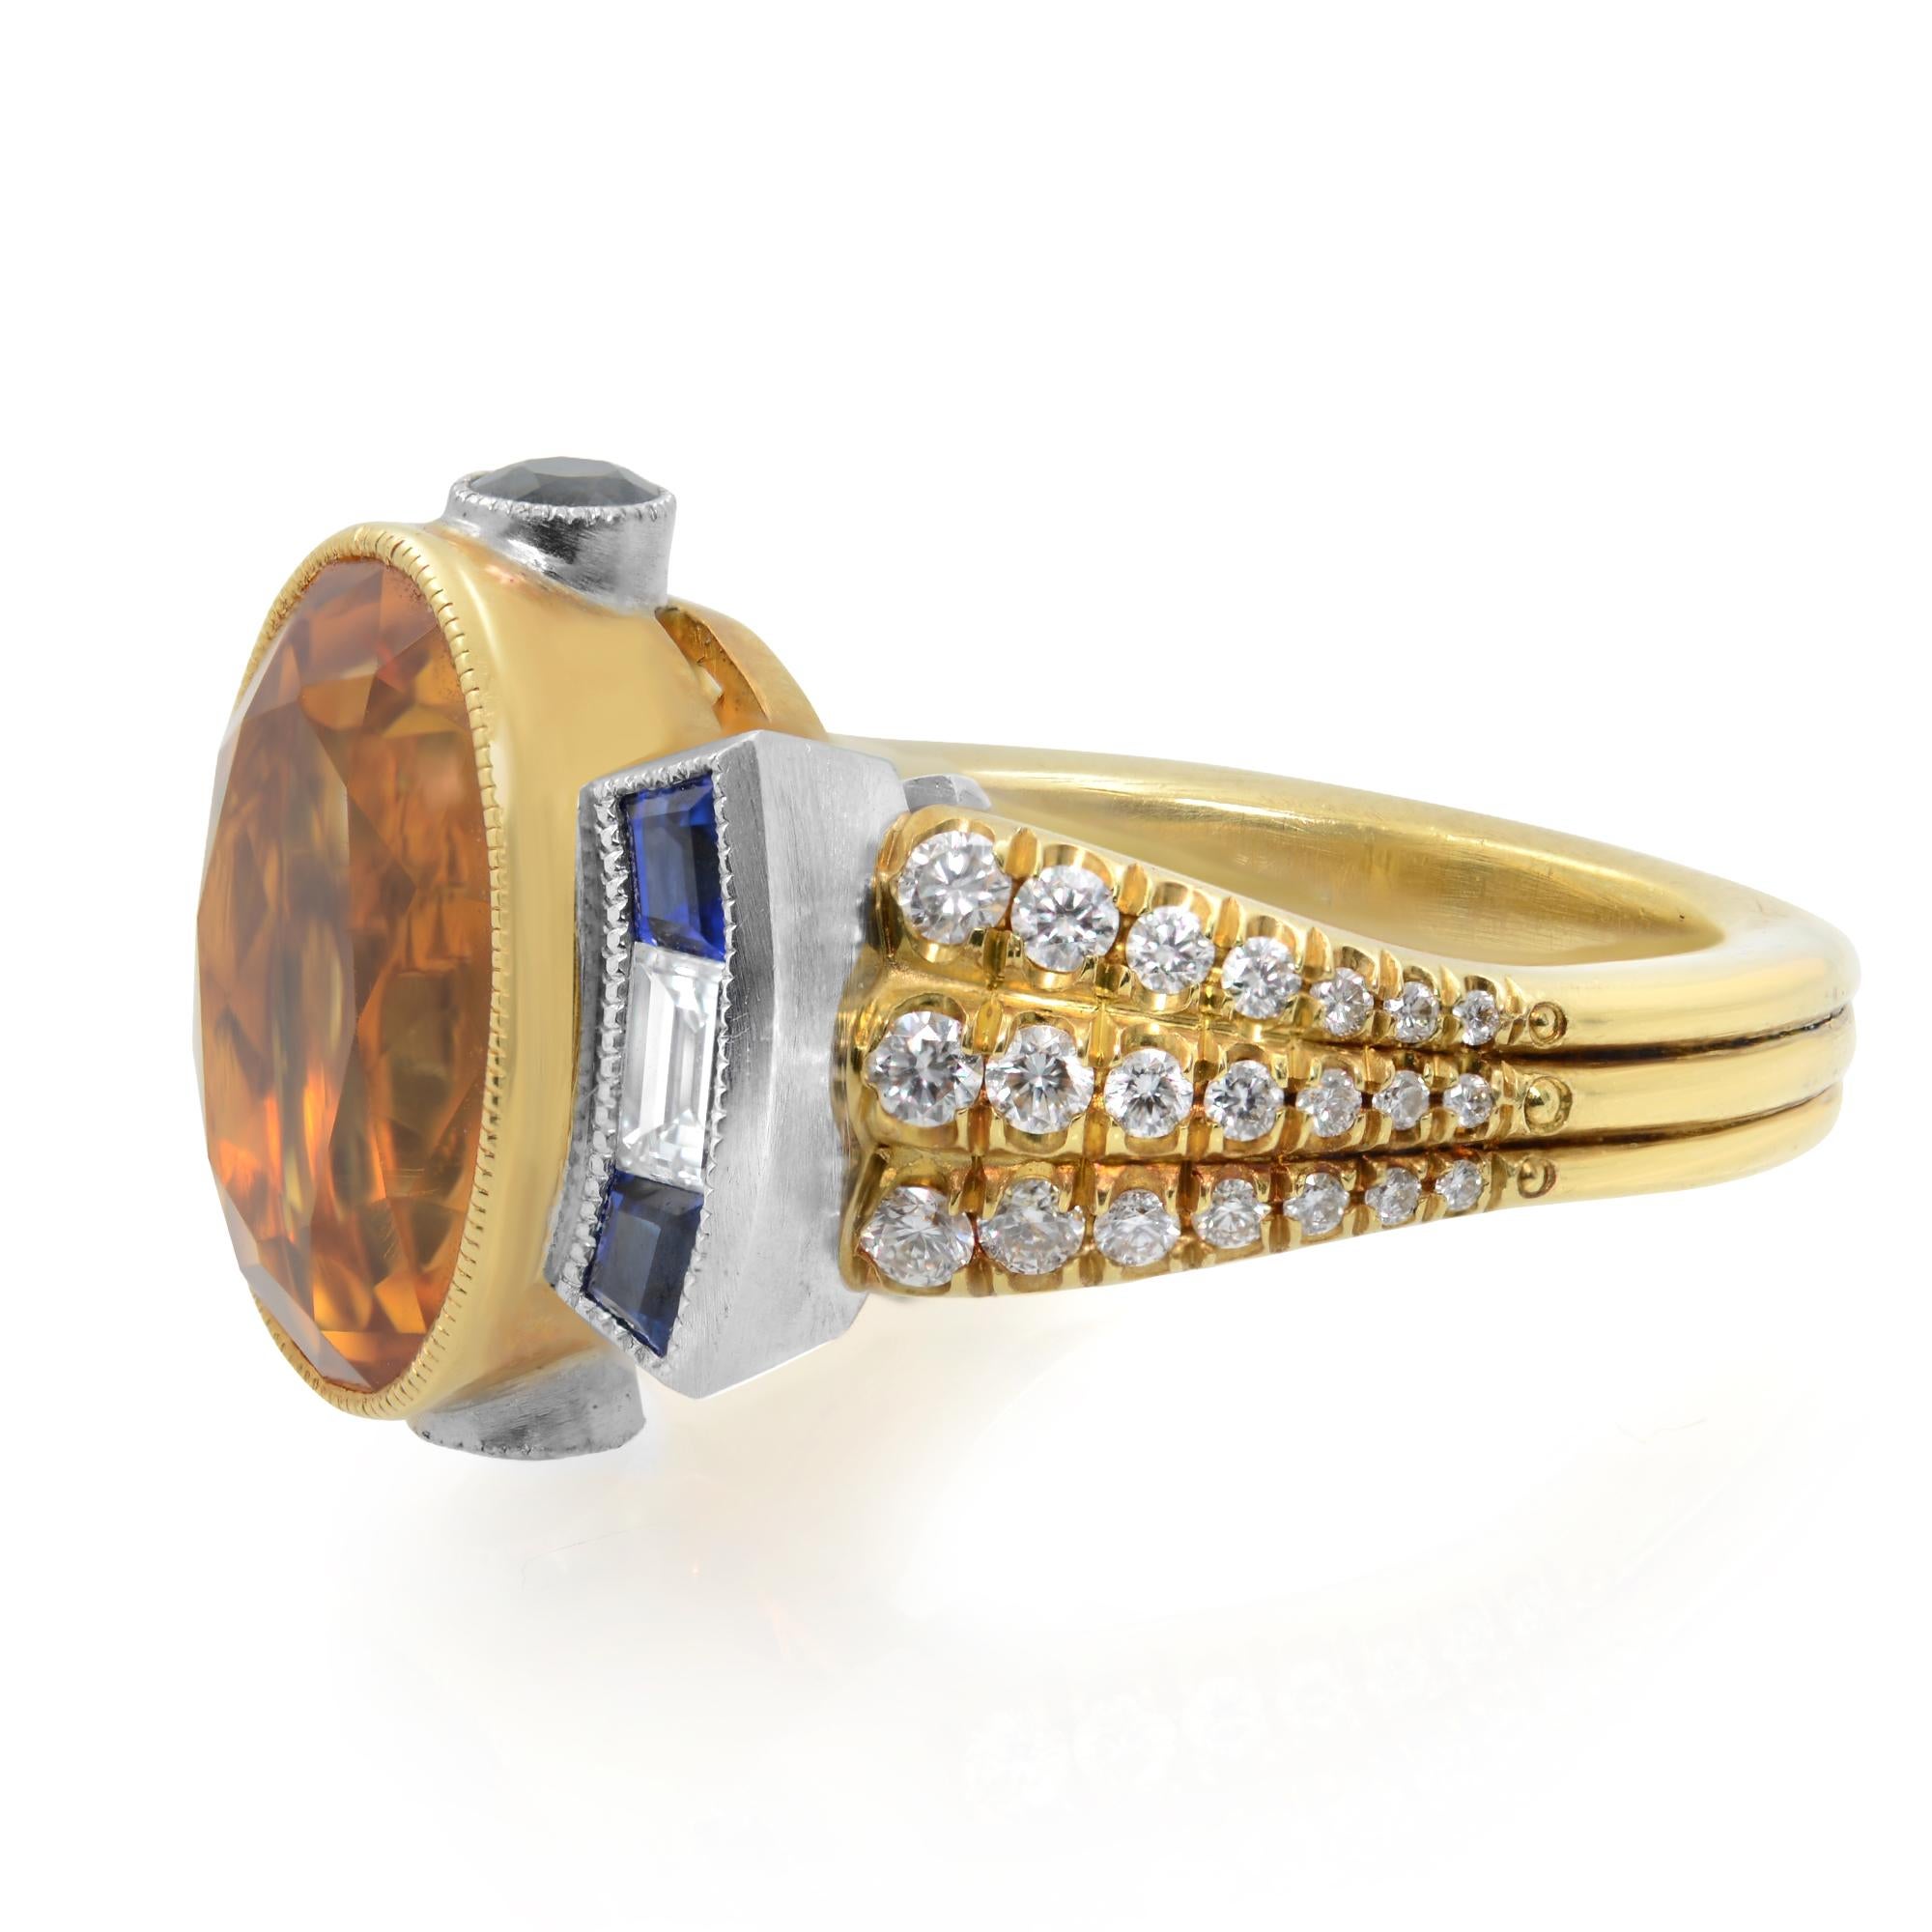 A unique Vintage style, Art Deco Style Yellow 8.02cts citrine engagement ring. Beautiful Yellow Oval Citrine bezel set as a center stone with baguette Blue Sapphires and diamonds on each side, creating a very unique look. More round cut diamonds are